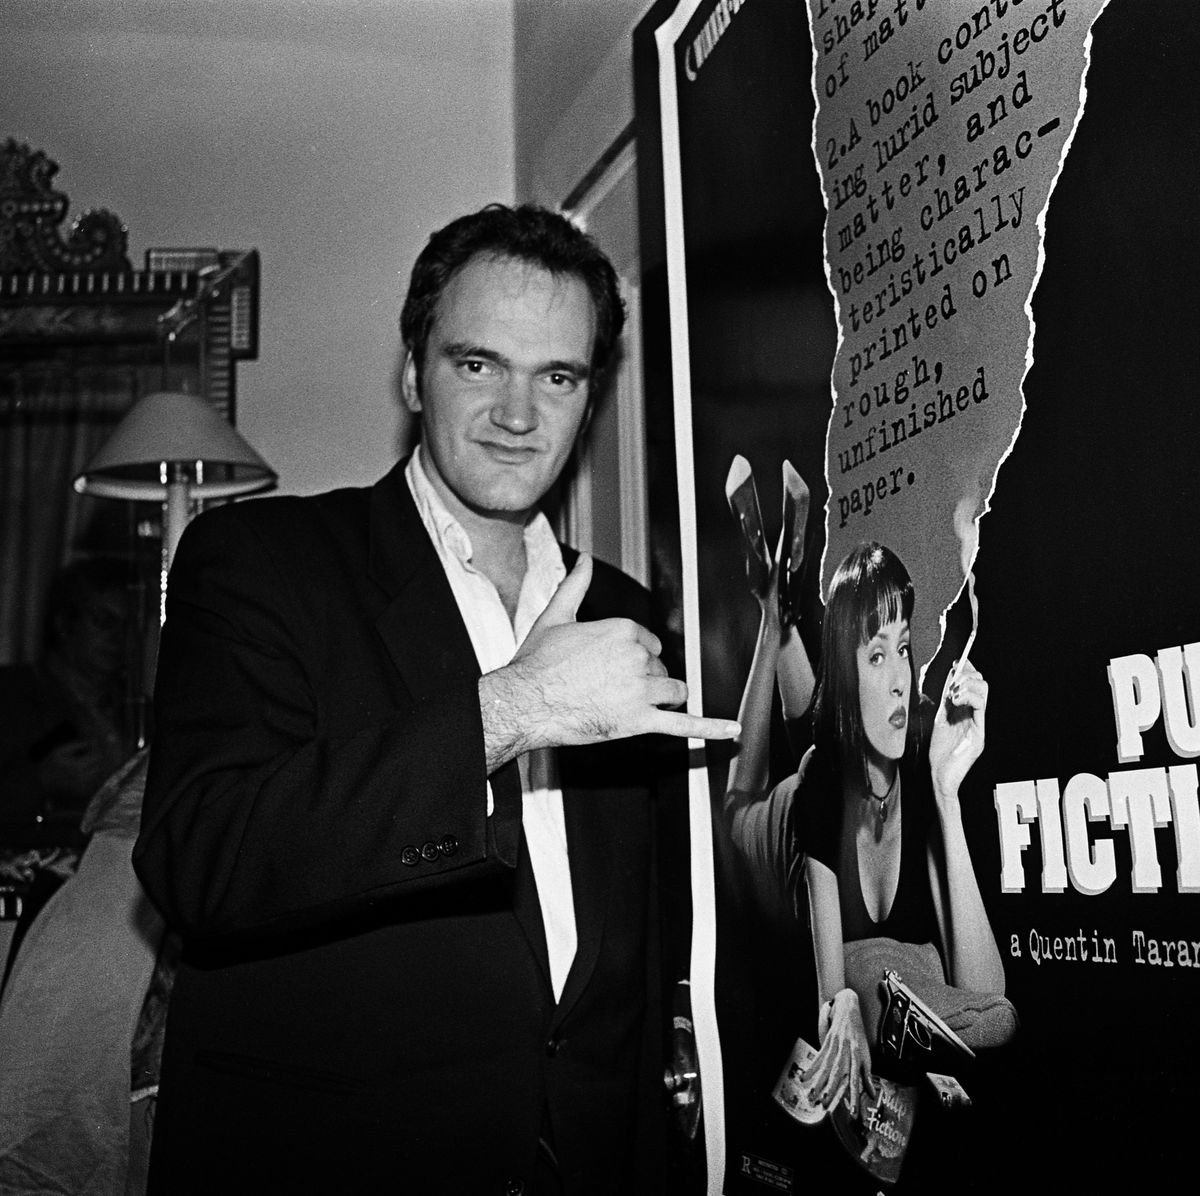 Pulp Fiction': Quentin Tarantino's unforgettable ode to nihilism